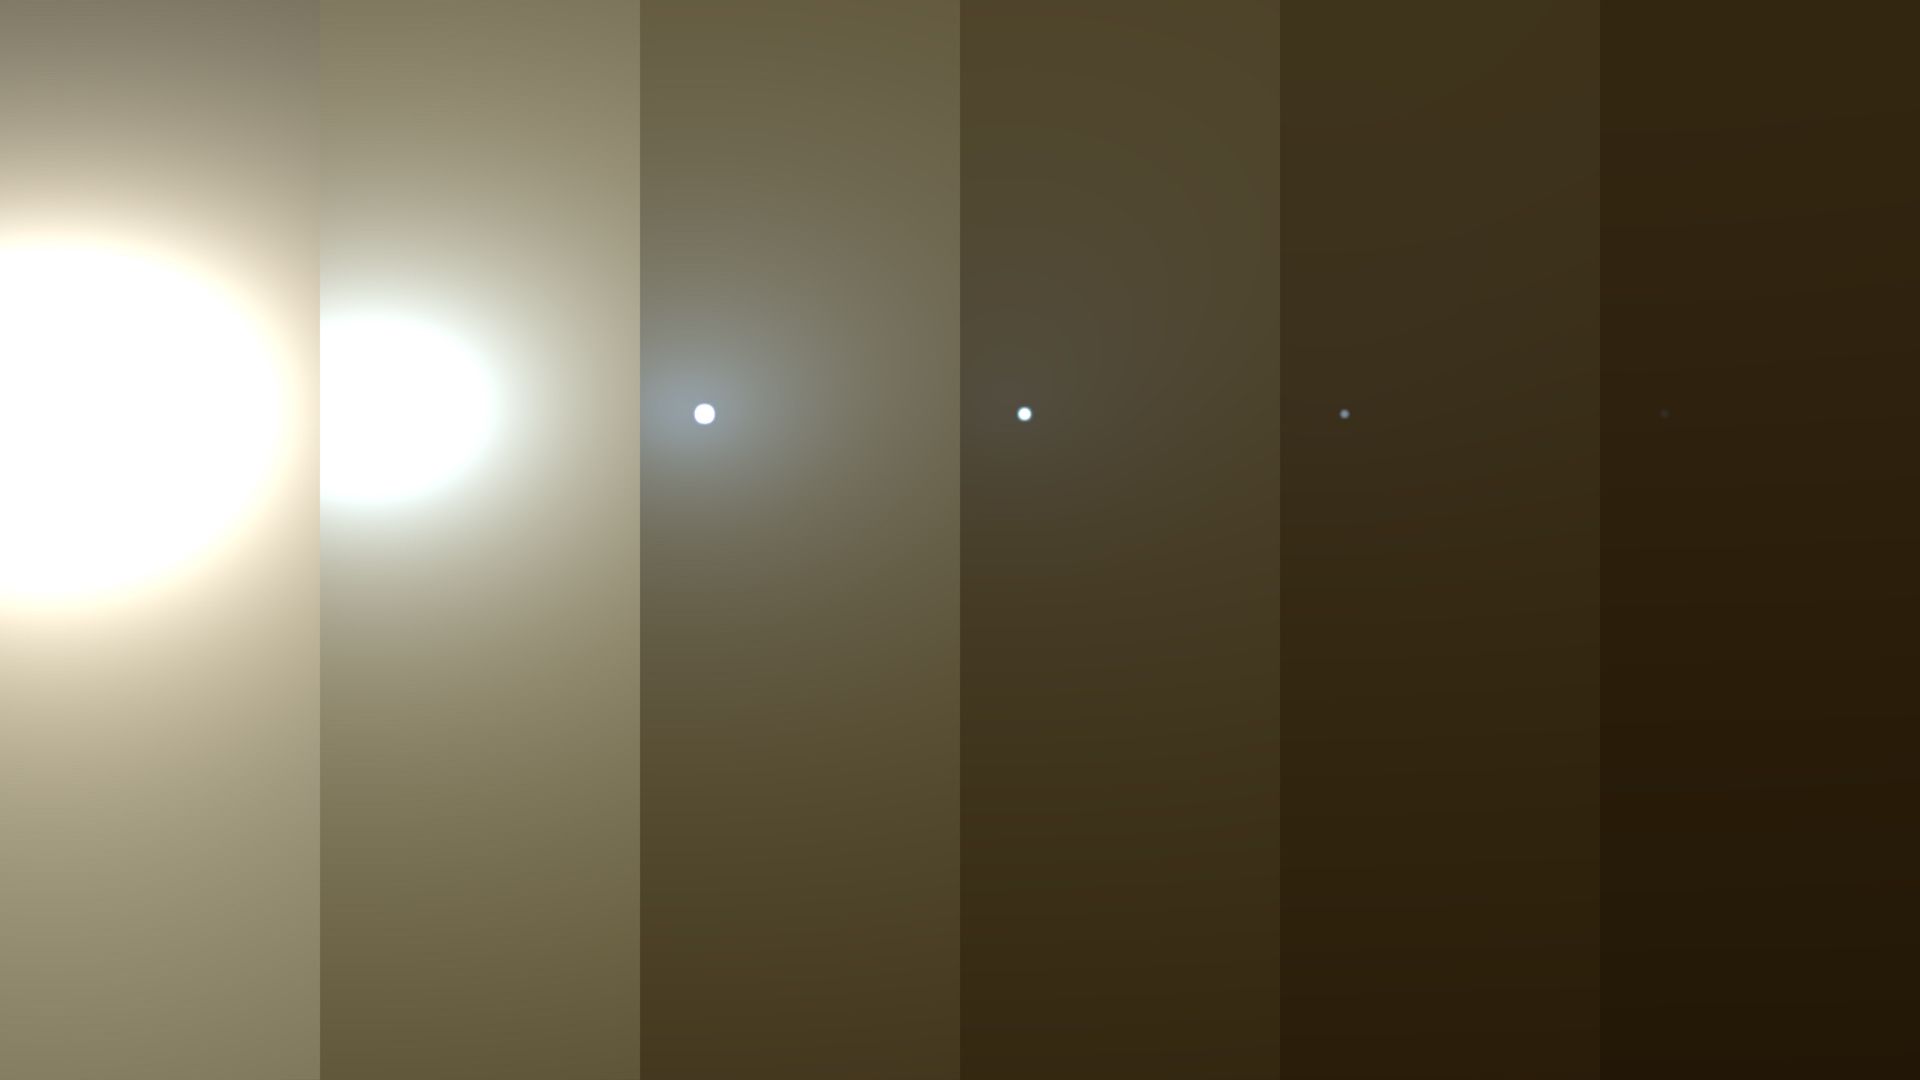 The Mars sky has turned to night for the Mars Opportunity rover, due to a massive dust storm.